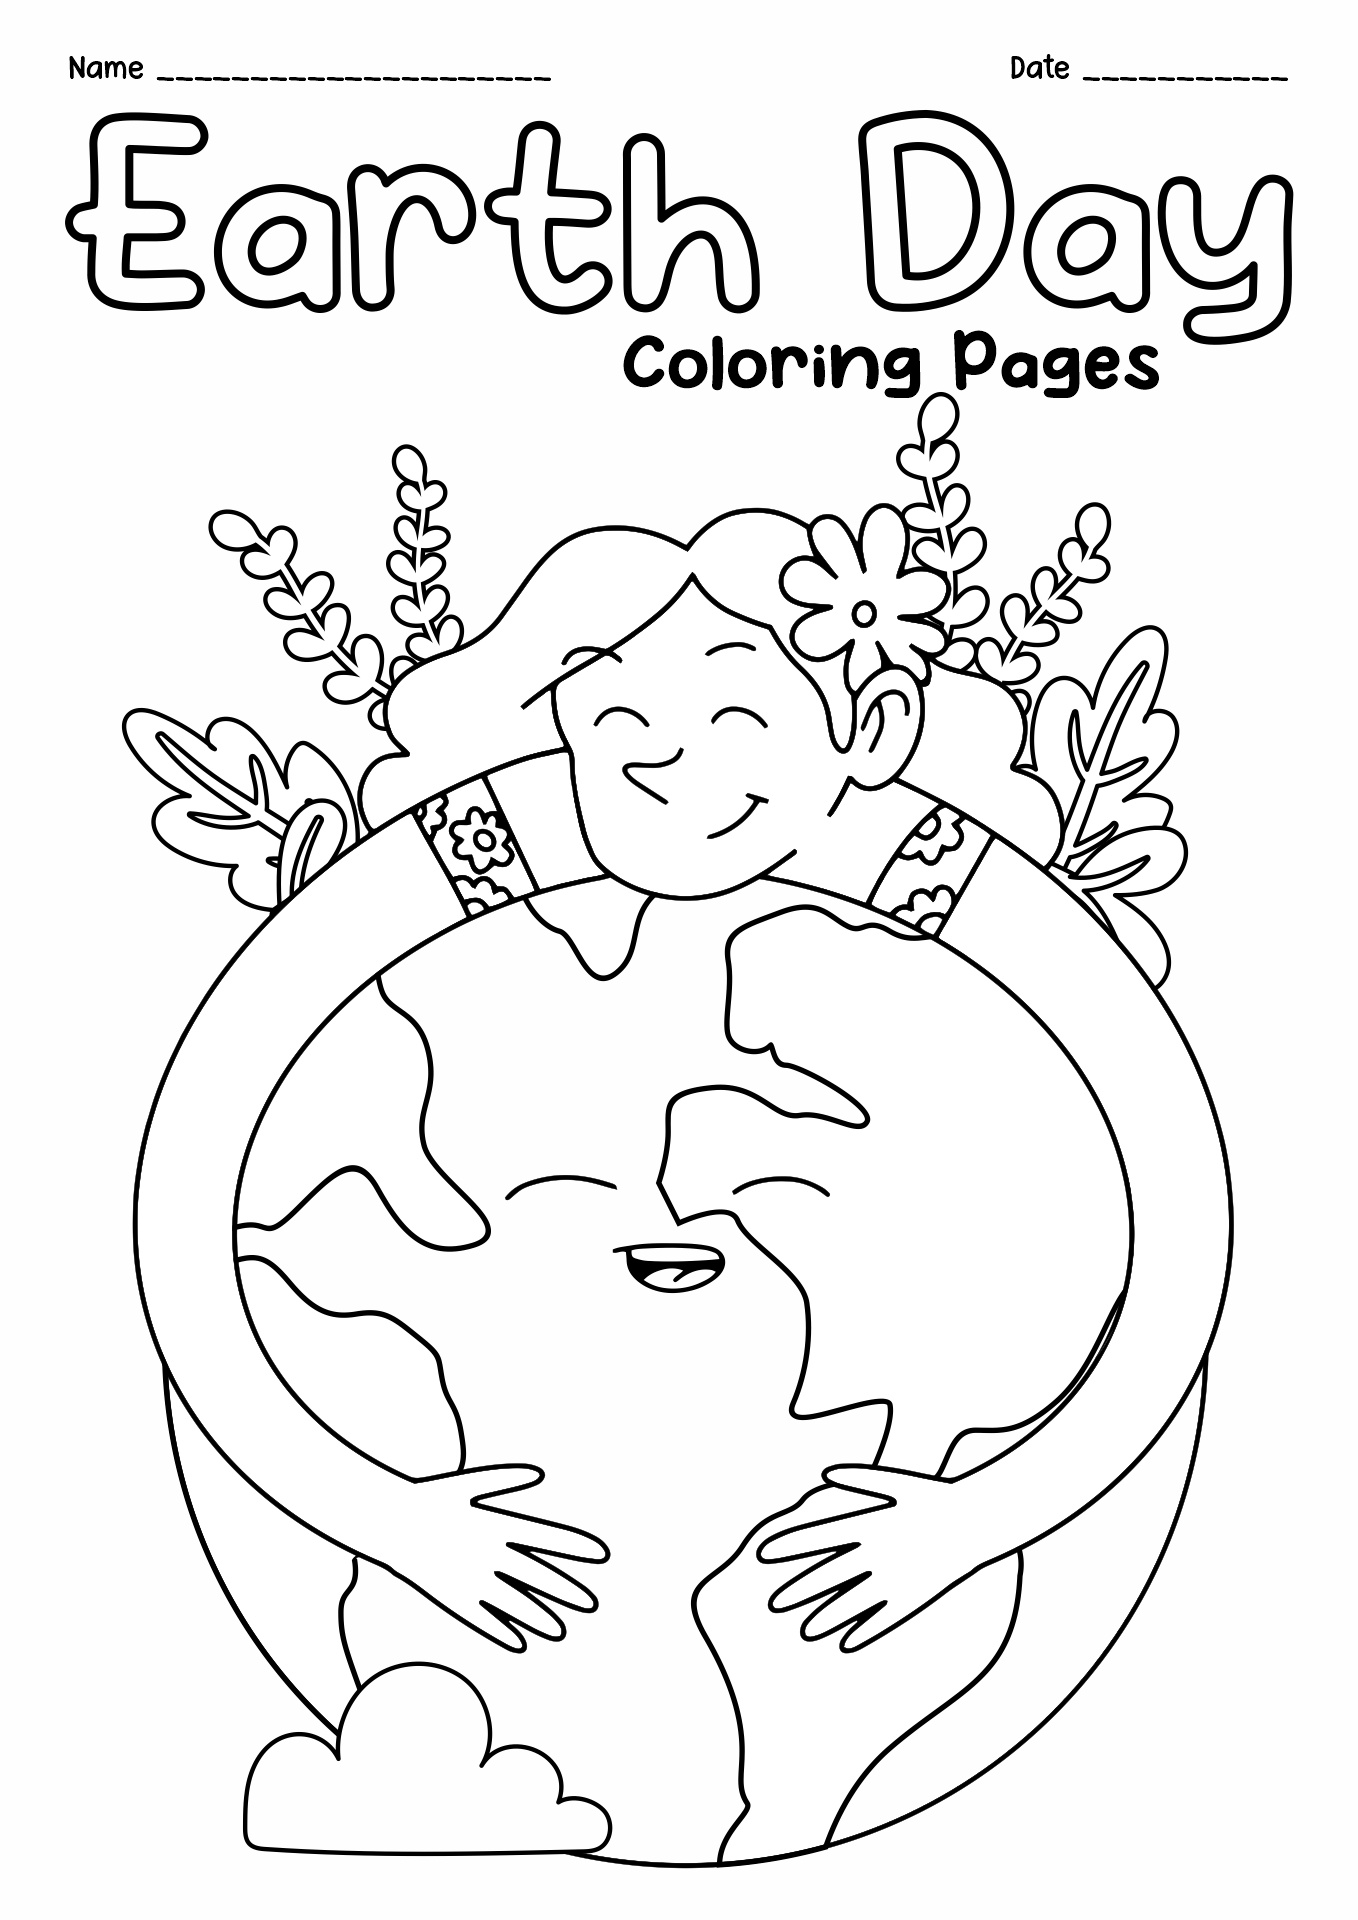 Free Earth Day Coloring Pages